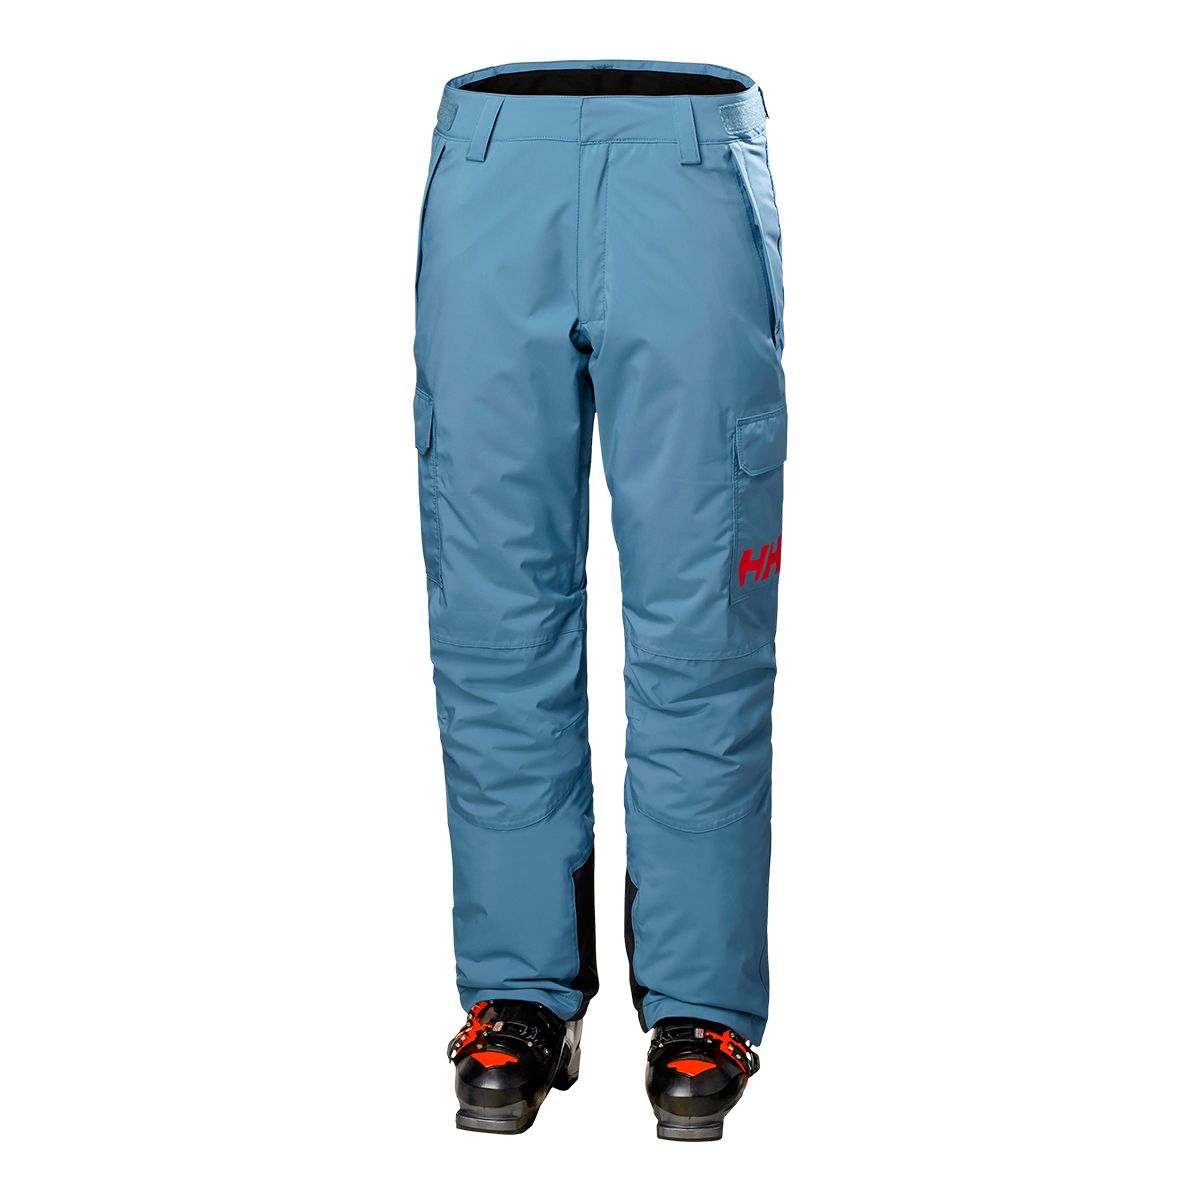 Helly Hansen Switch Cargo Pant Review: A Durable, Versatile Snow Pant